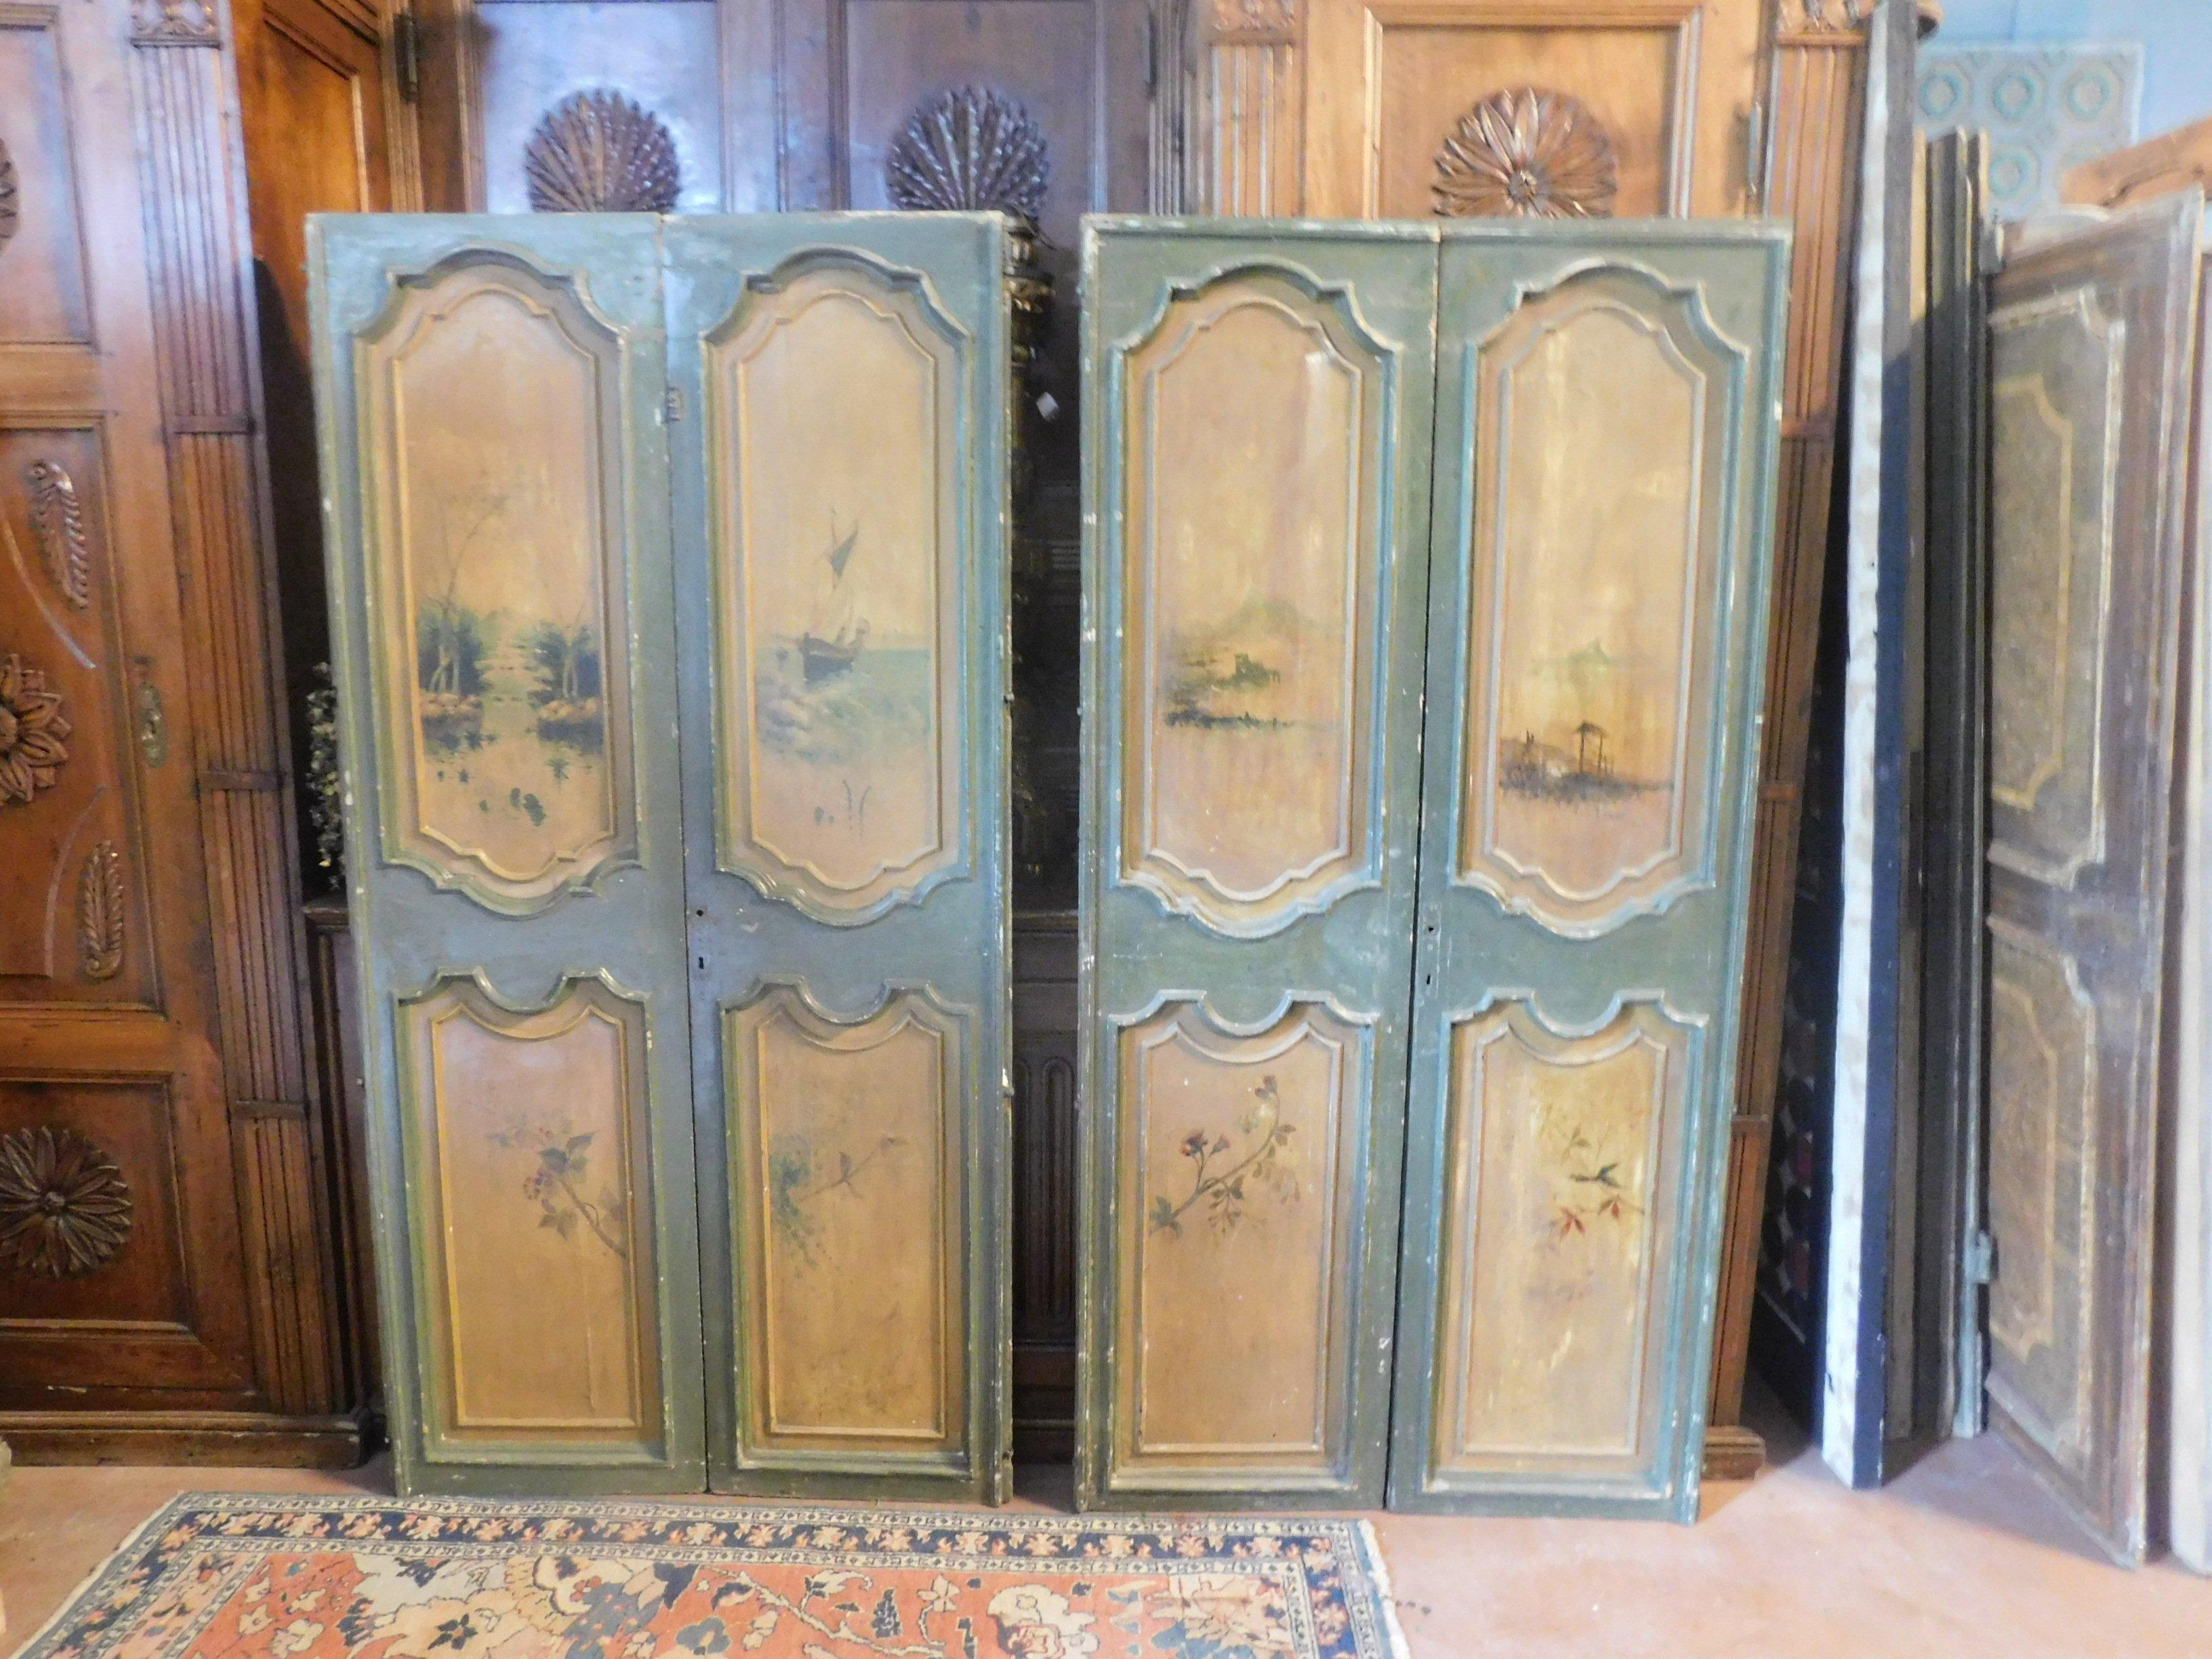 N.2 ancient double green and yellow lacquered doors with painted landscapes, painted with landscapes on both sides, strong and beautiful colors, first original lacquer and handmade painting in the 1700 in Italy (Florence), very beautiful and well